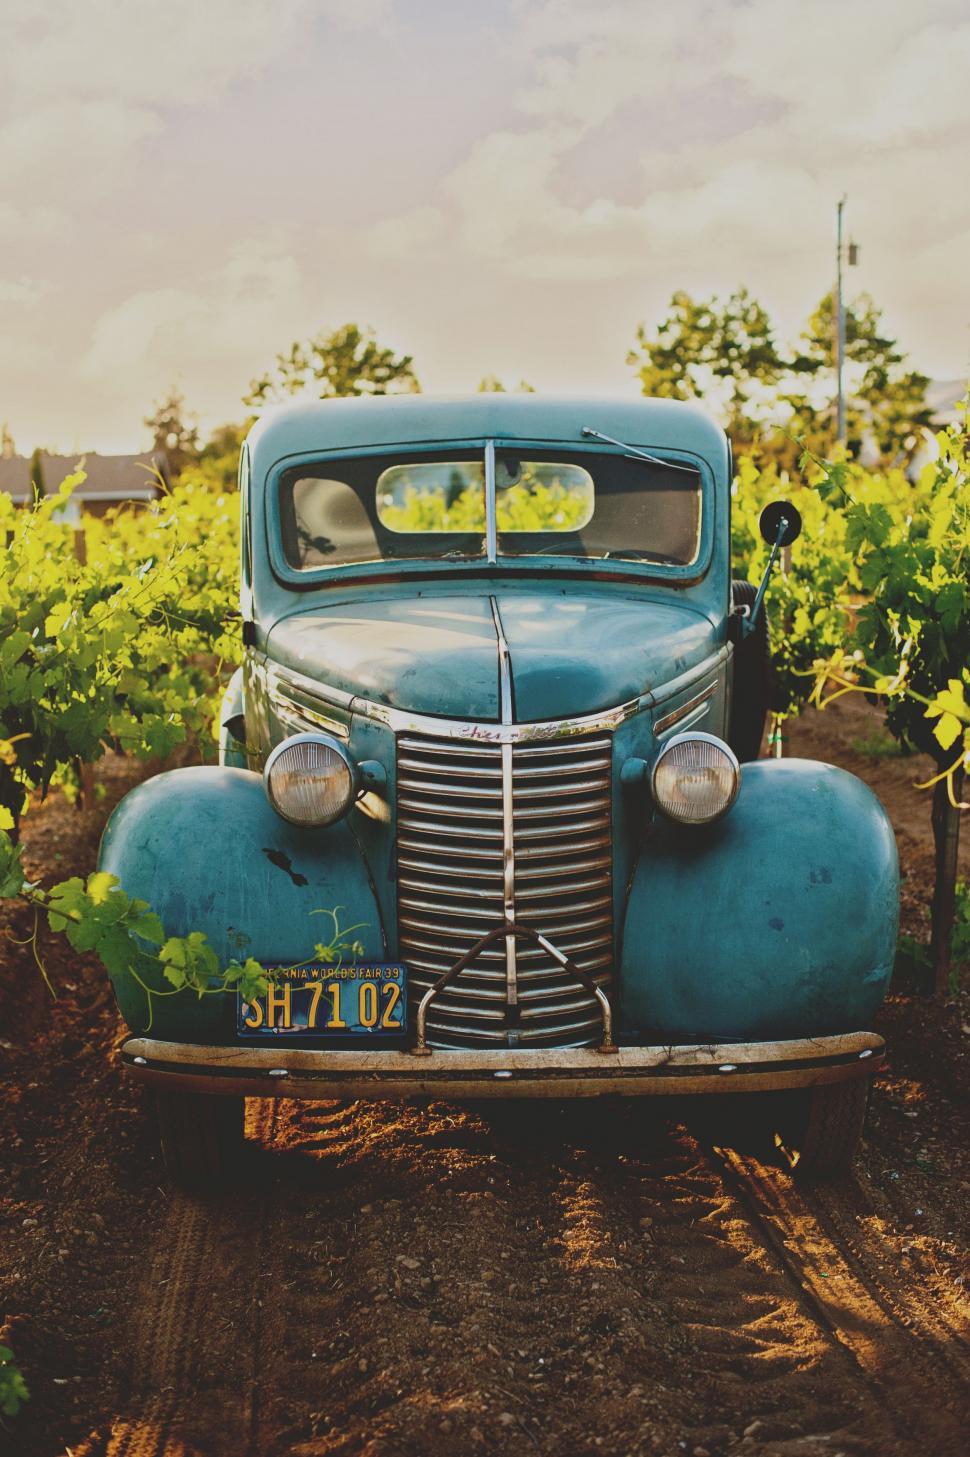 Free Image of Old Blue Truck Parked in Vineyard 